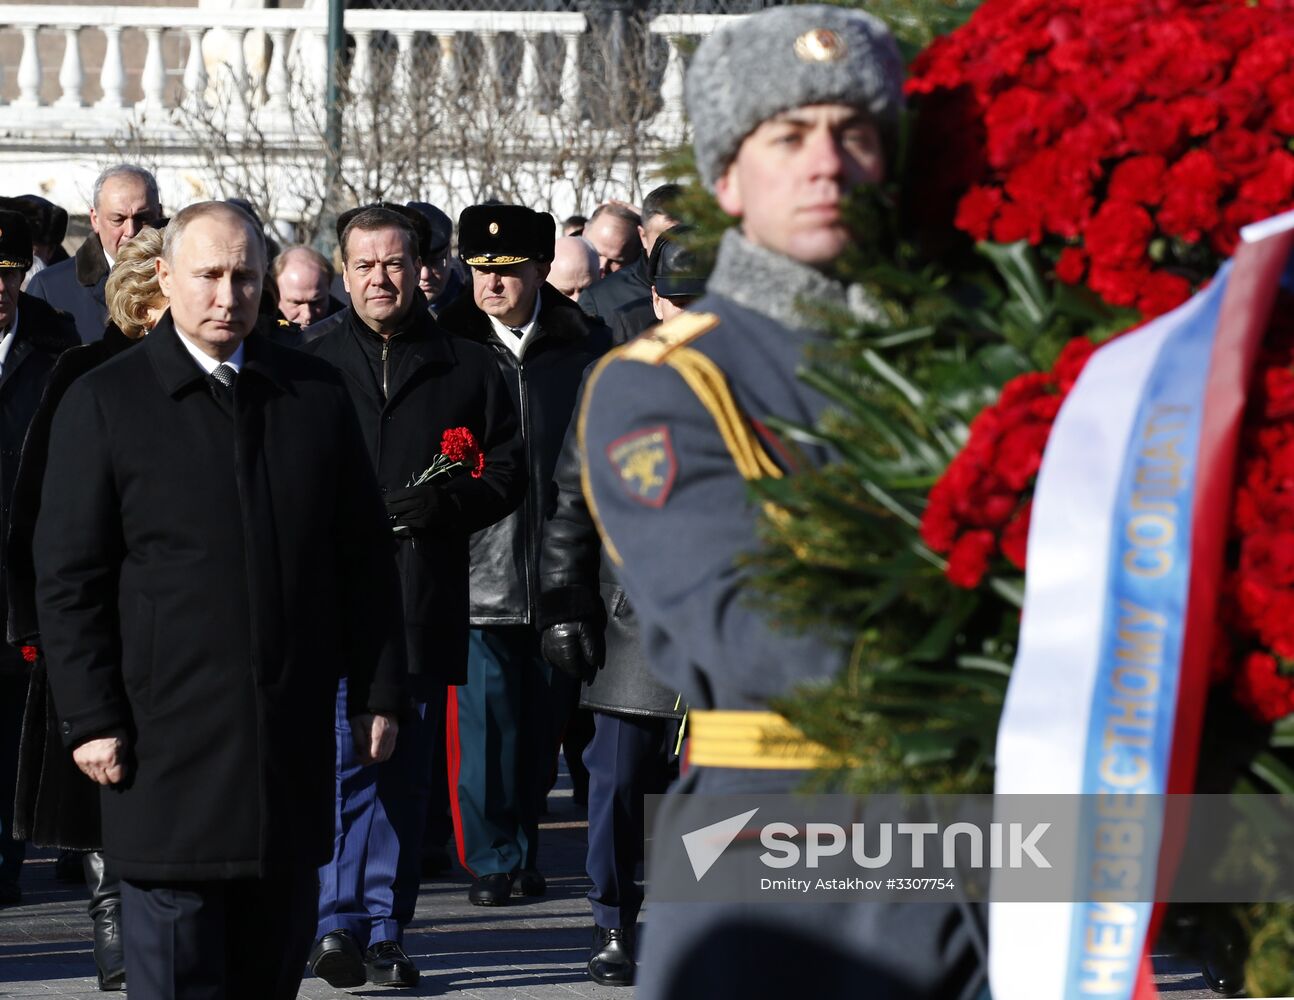 Wreath-laying ceremony at Tomb of Unknown Soldier on Defender of the Fatherland Day